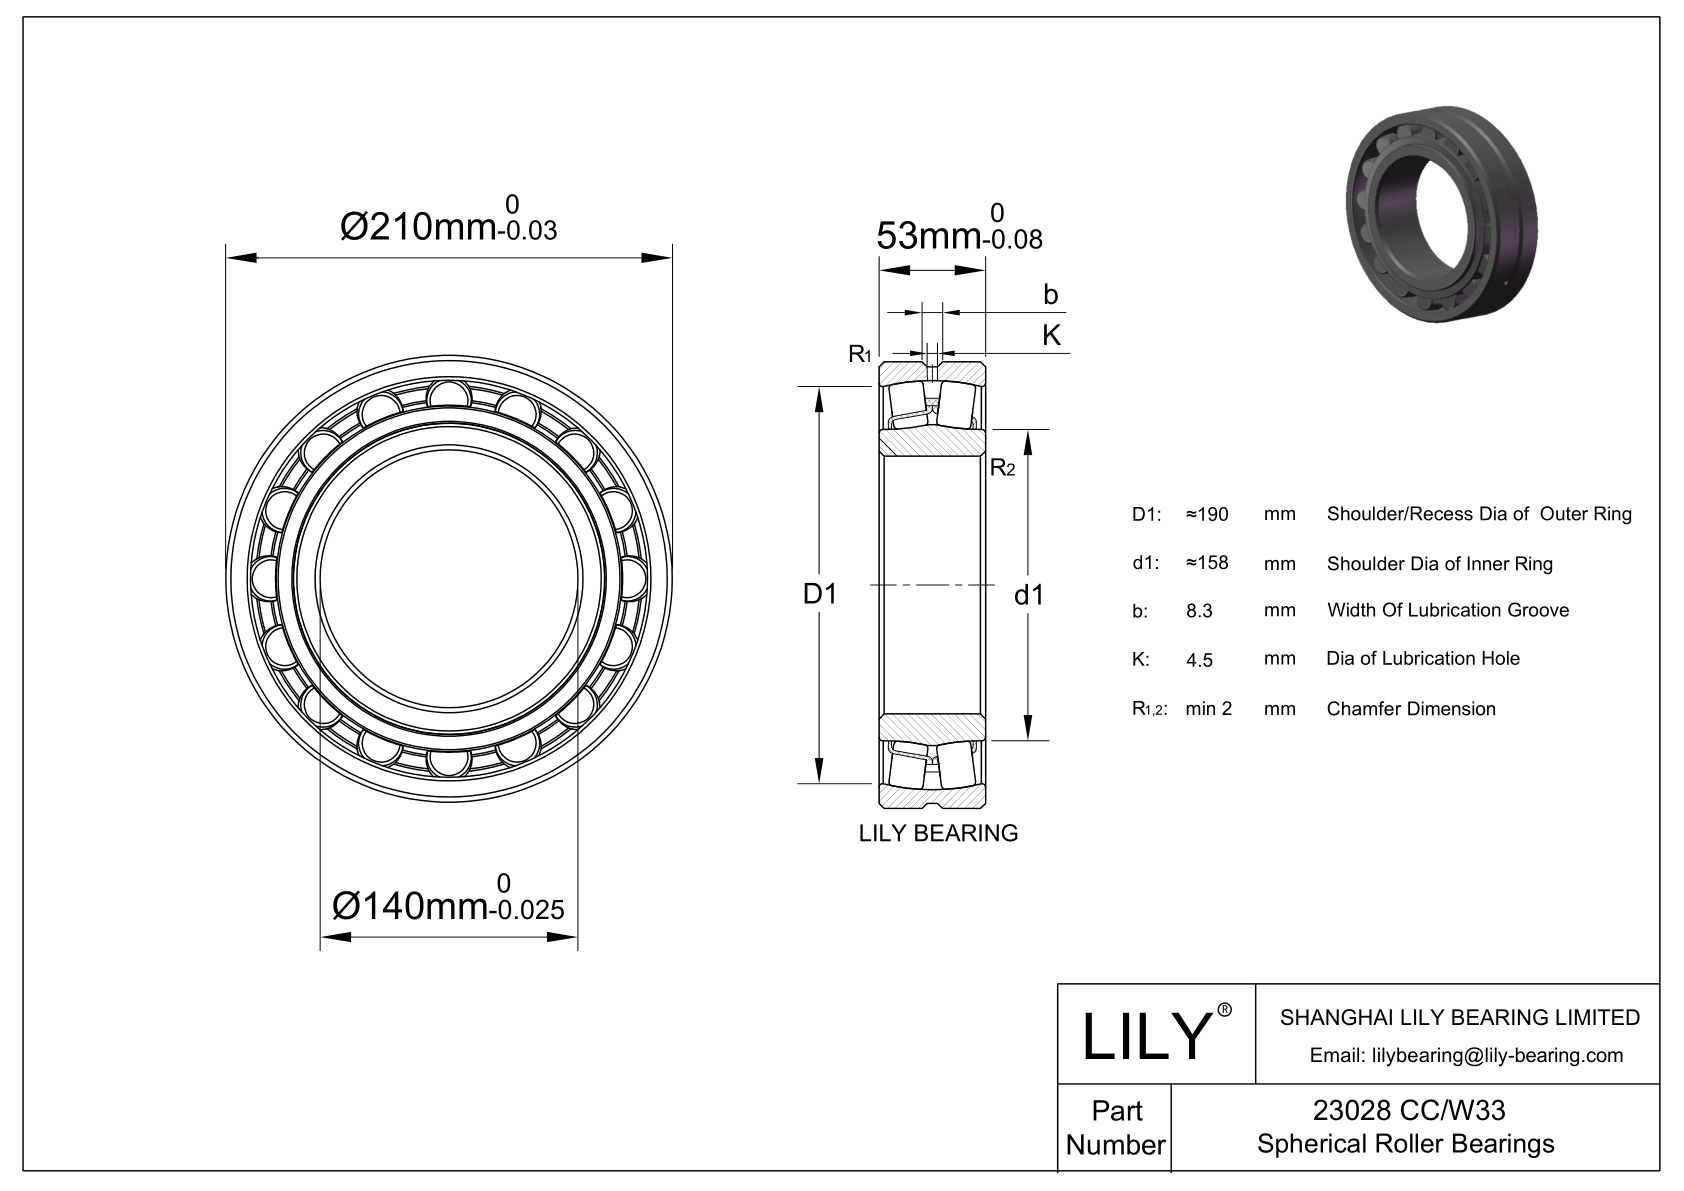 23028 CC/W33 Double Row Spherical Roller Bearing cad drawing